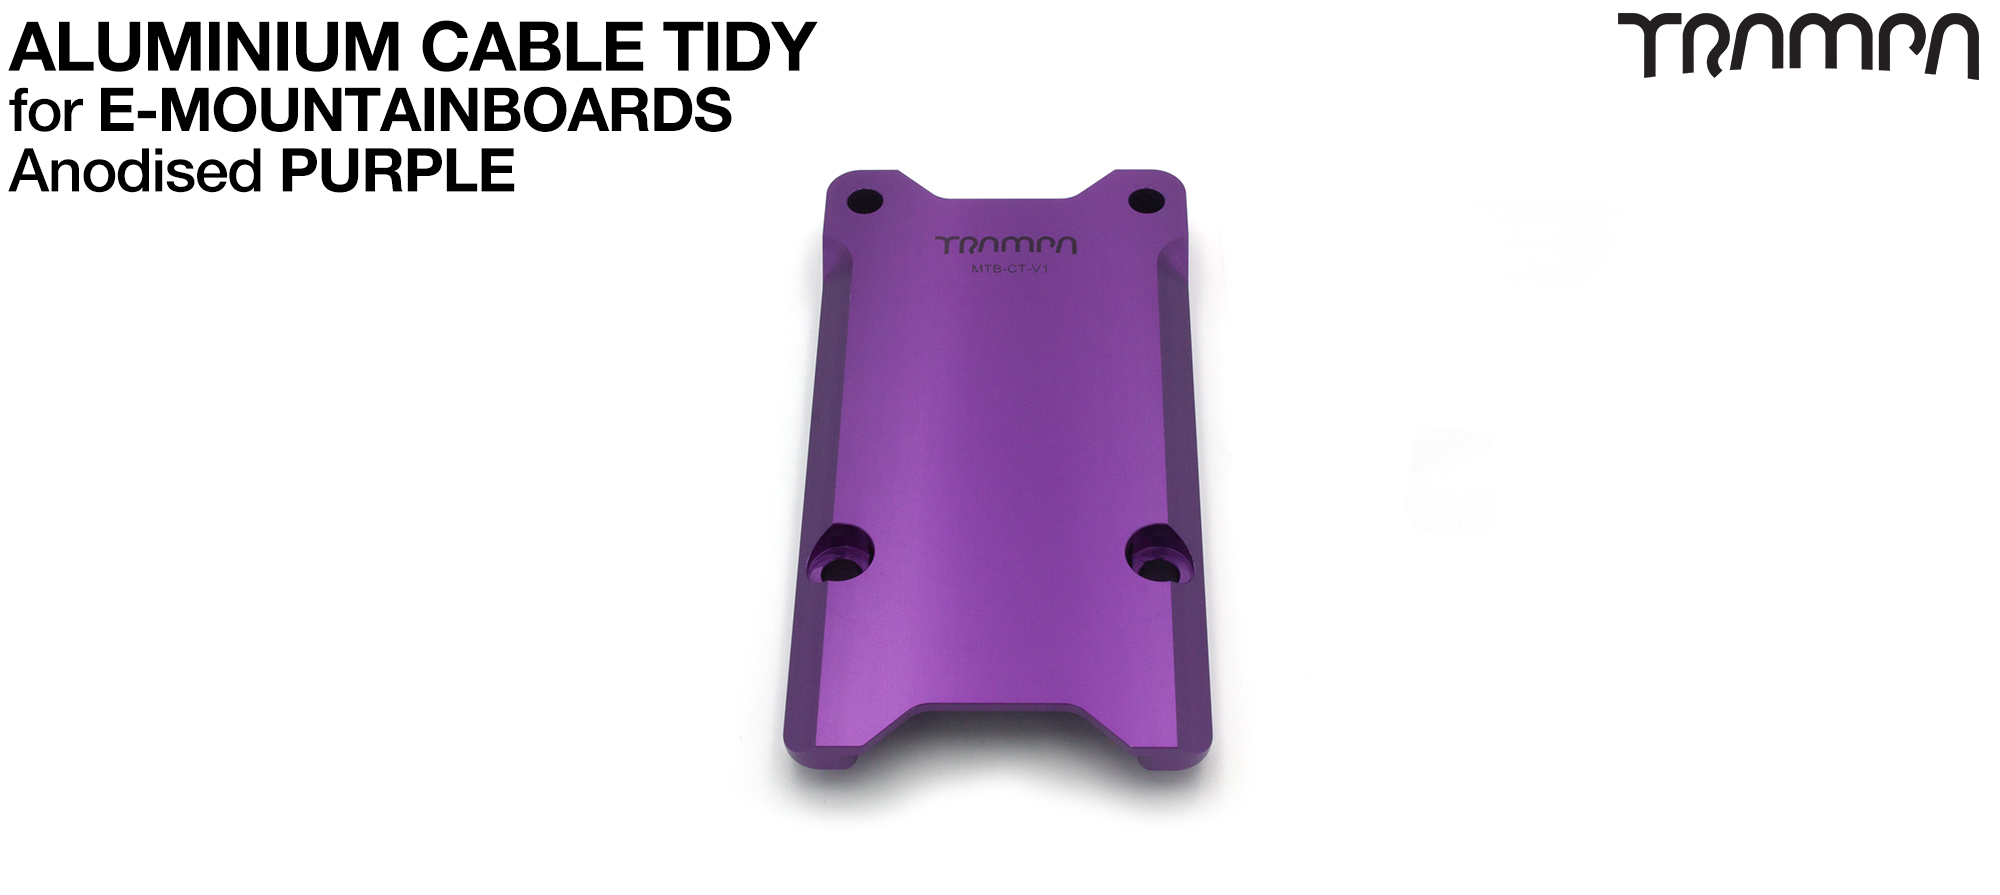 CABLE Router - PURPLE 